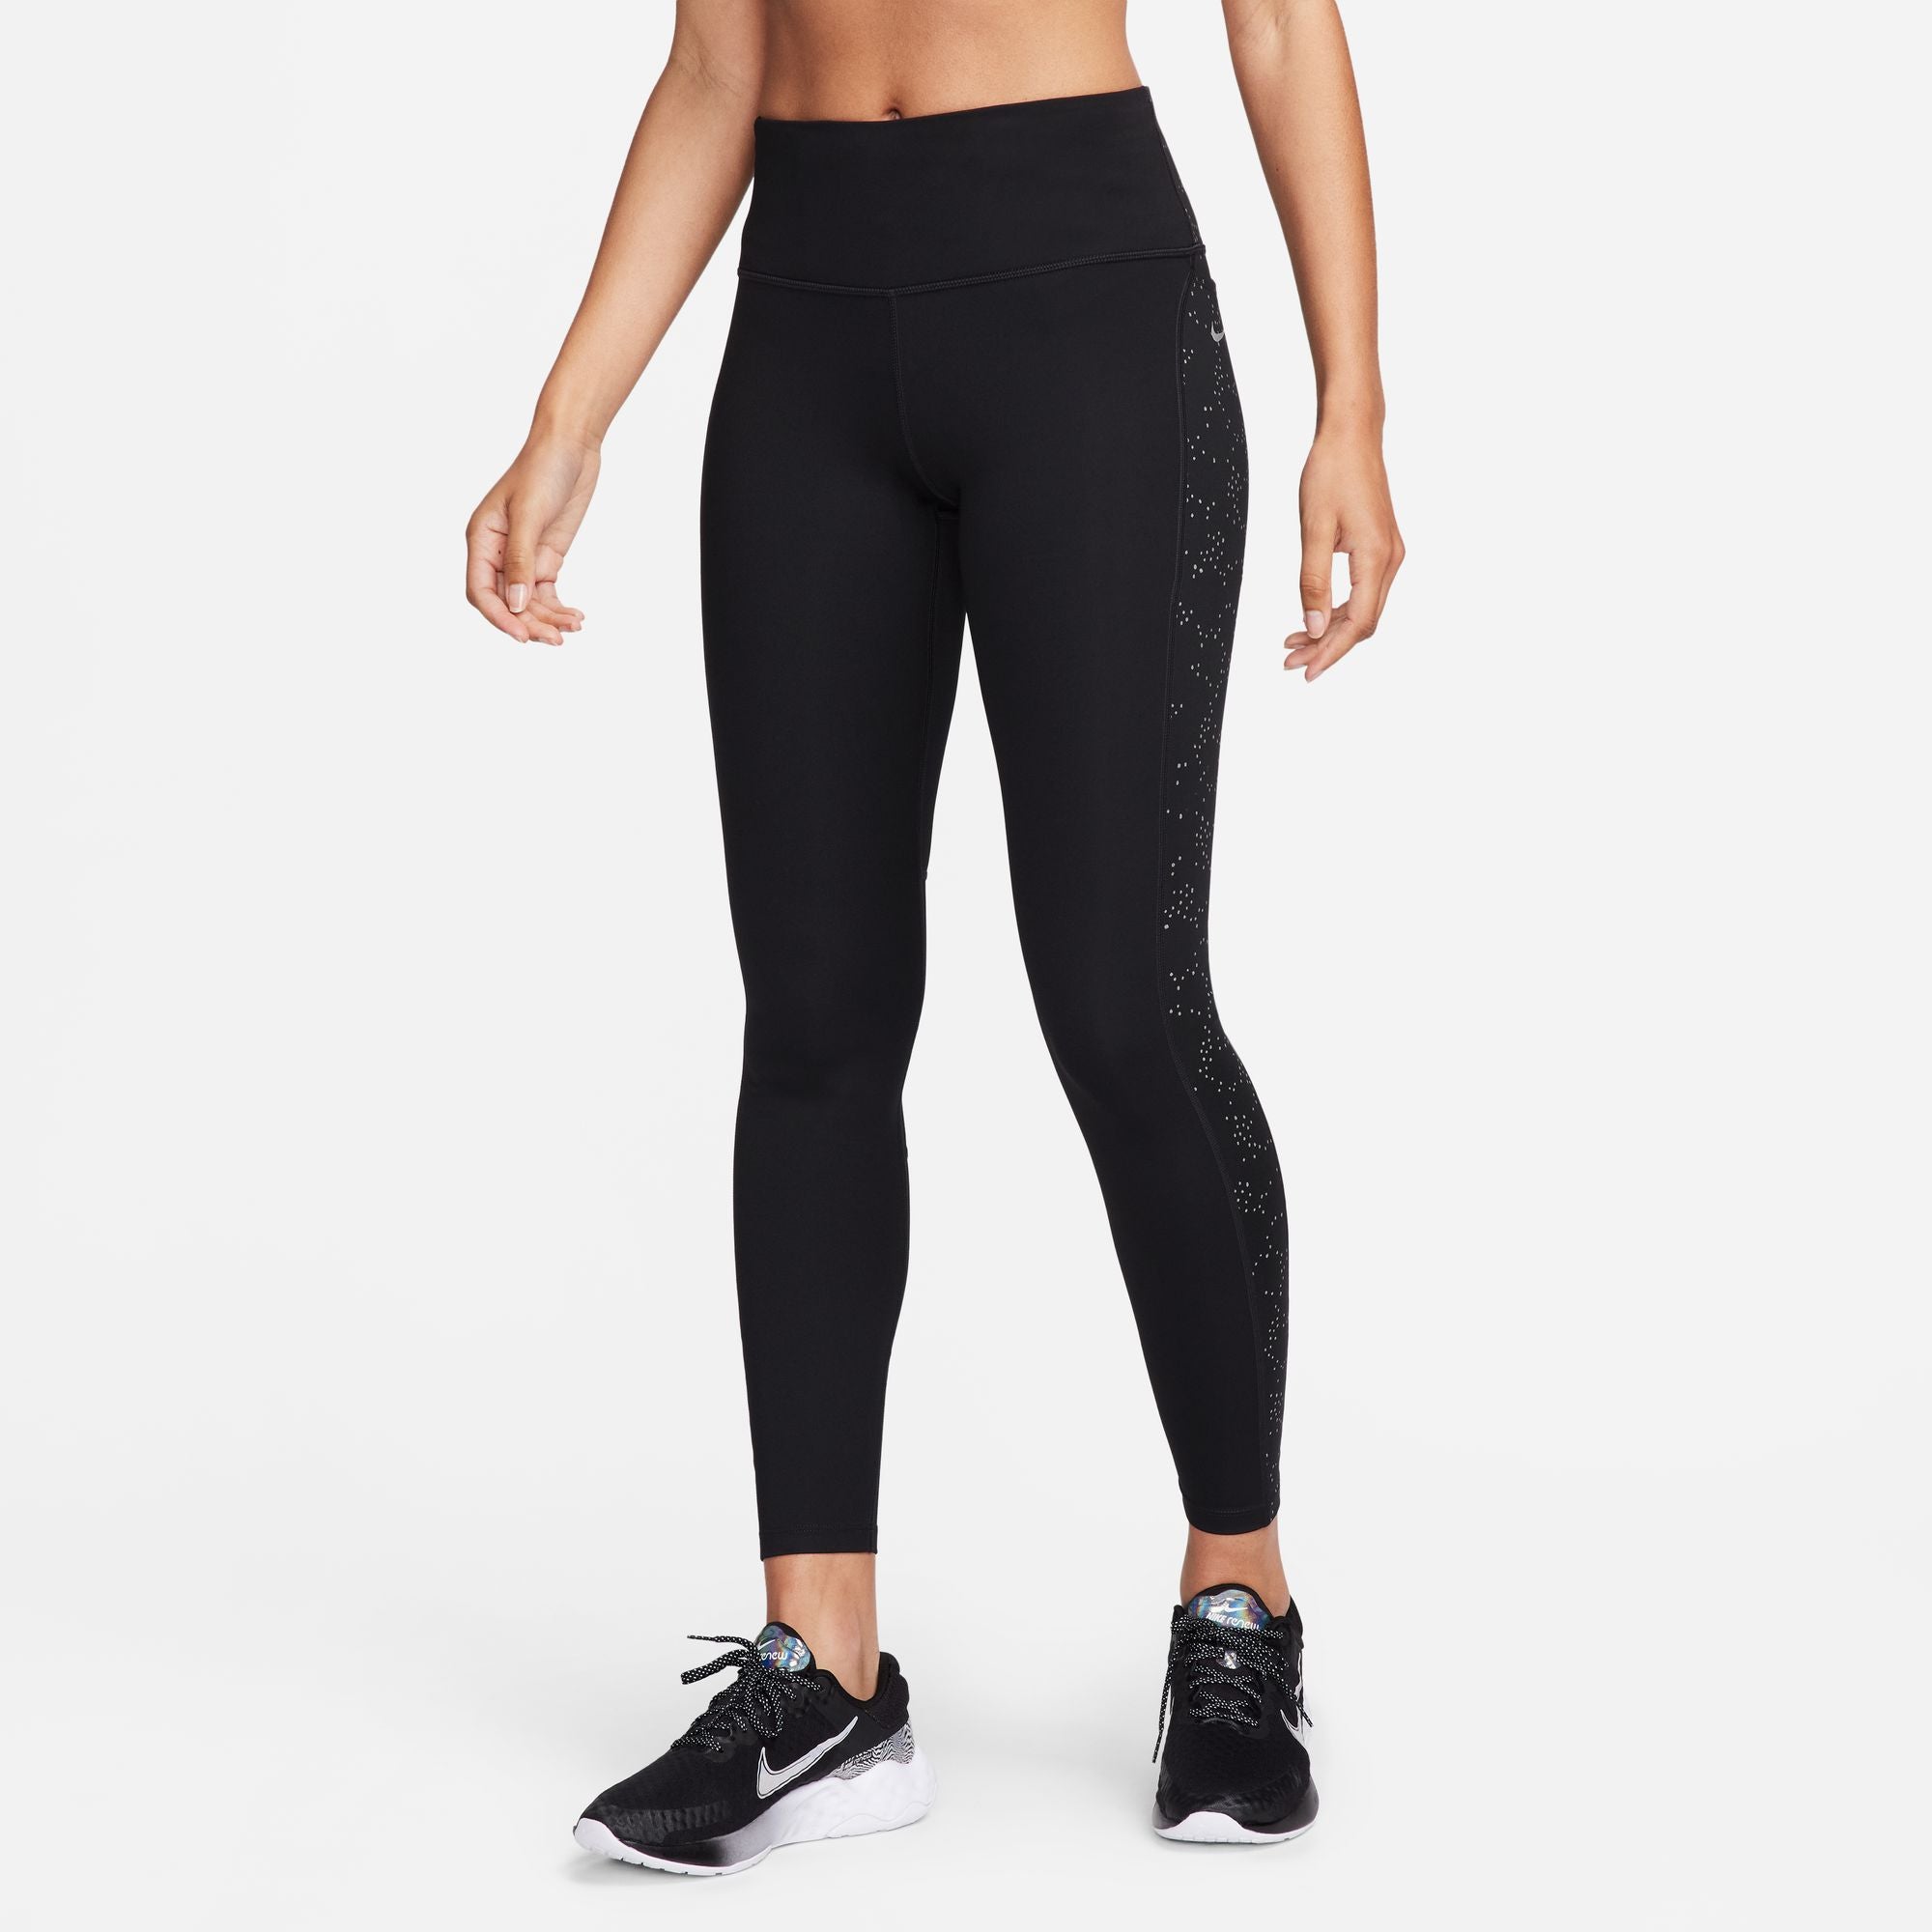 Shakeout Running Pants for Women